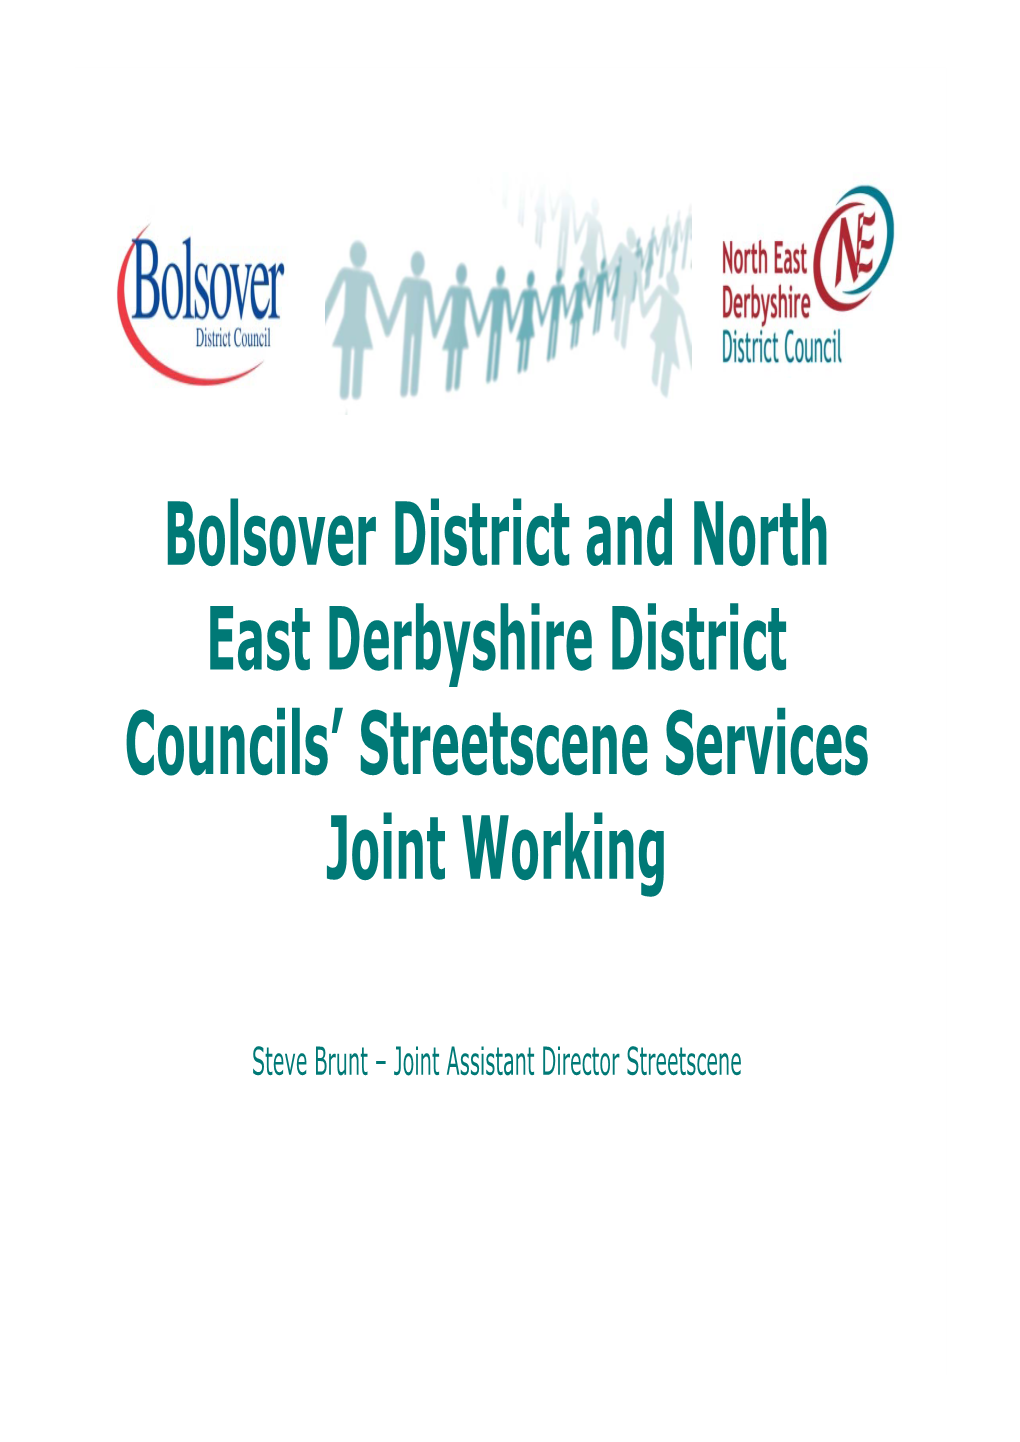 Bolsover District and North East Derbyshire District Councils’ Streetscene Services Joint Working